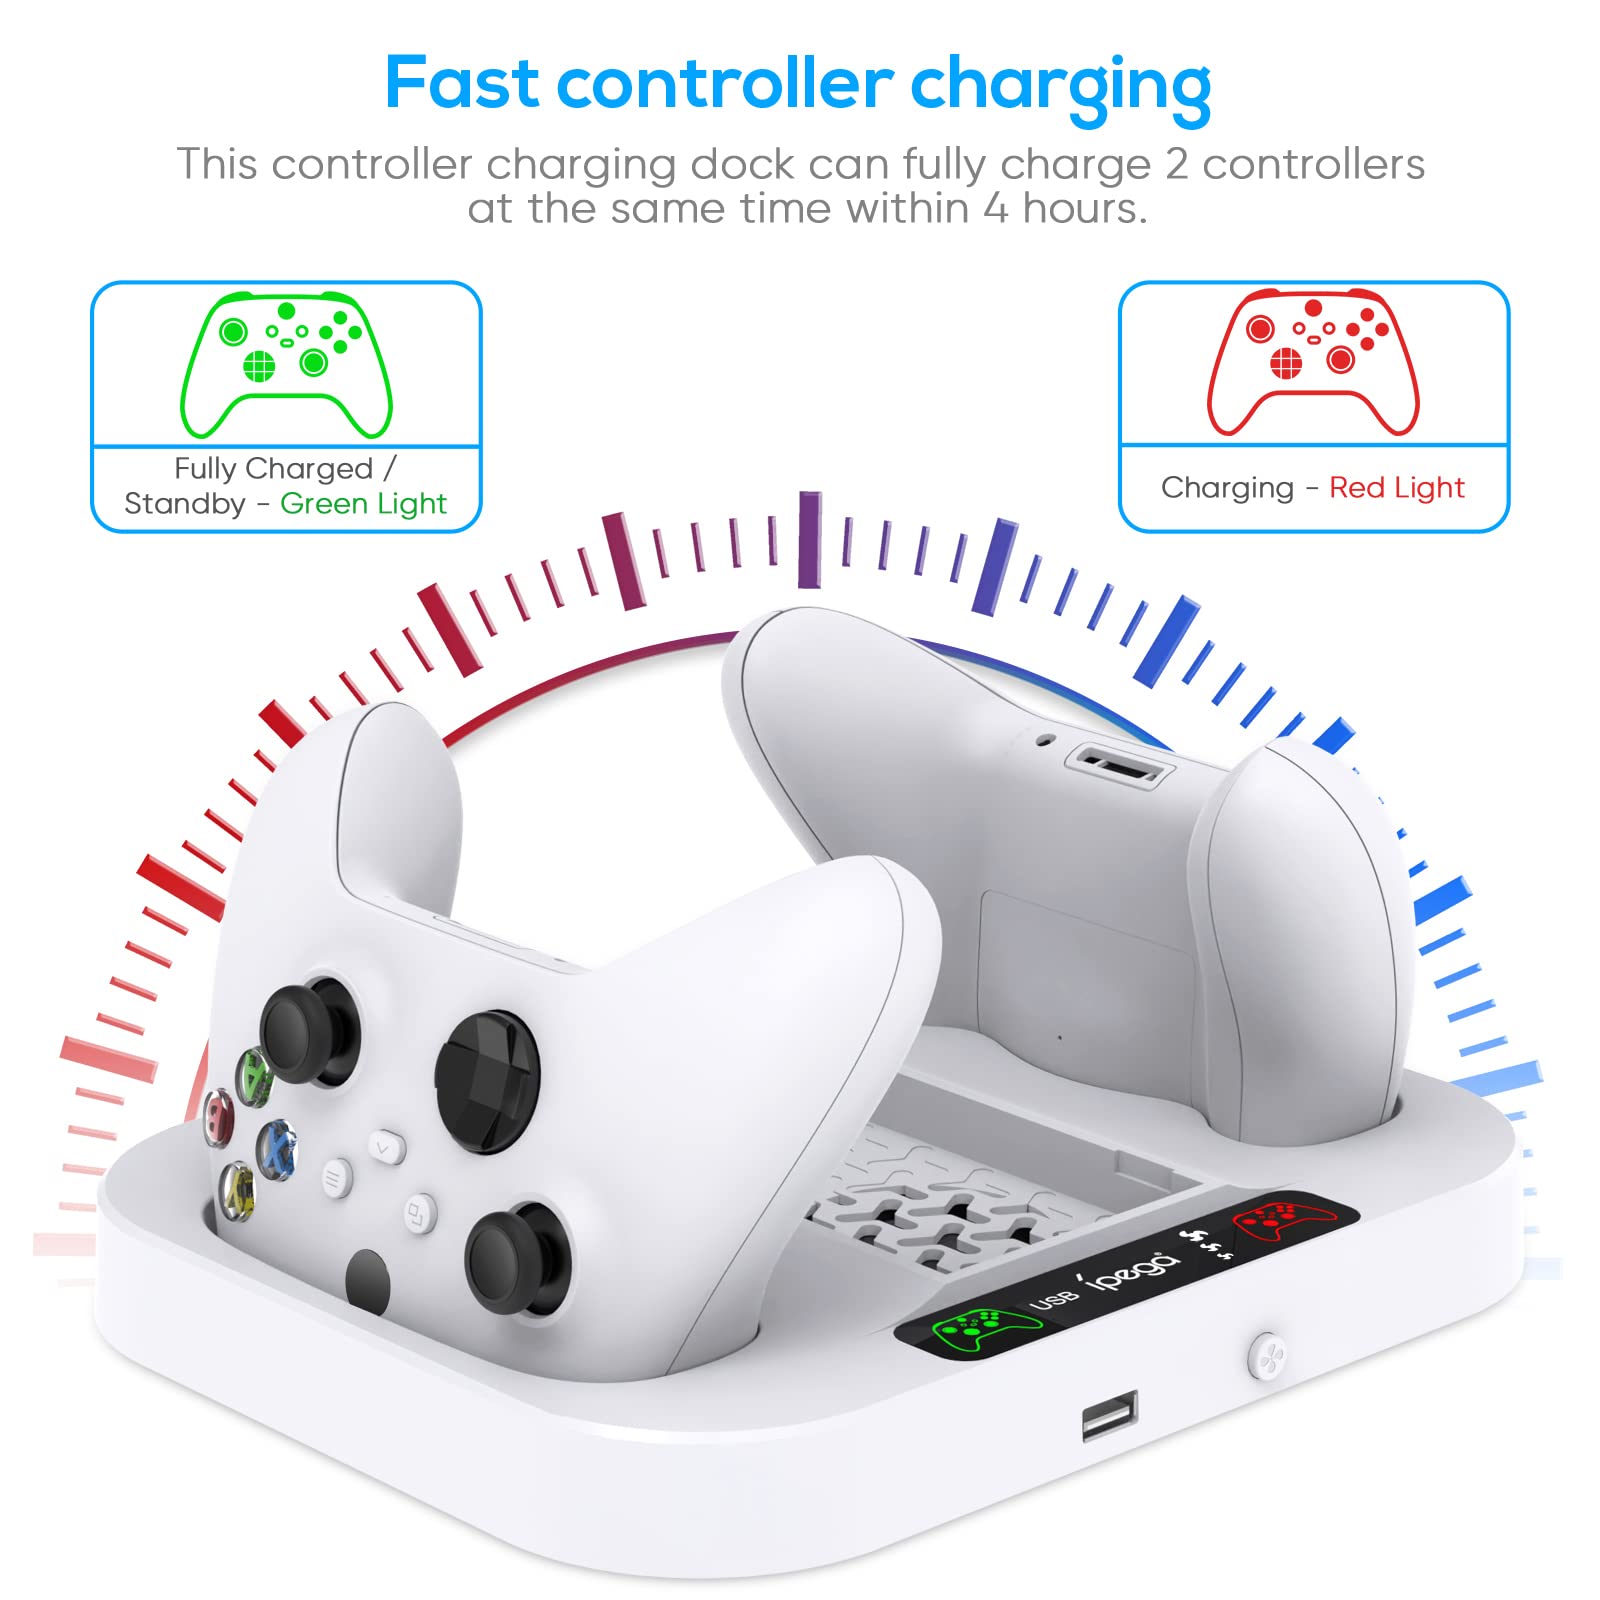 Charging Stand with Cooling Fan for Xbox Series S Console, Controller Accessories Charger Station Dock with 2 x 1400mAh Rechargeable Battery Packs,3 Levels Fans Speed for Xbox Series S